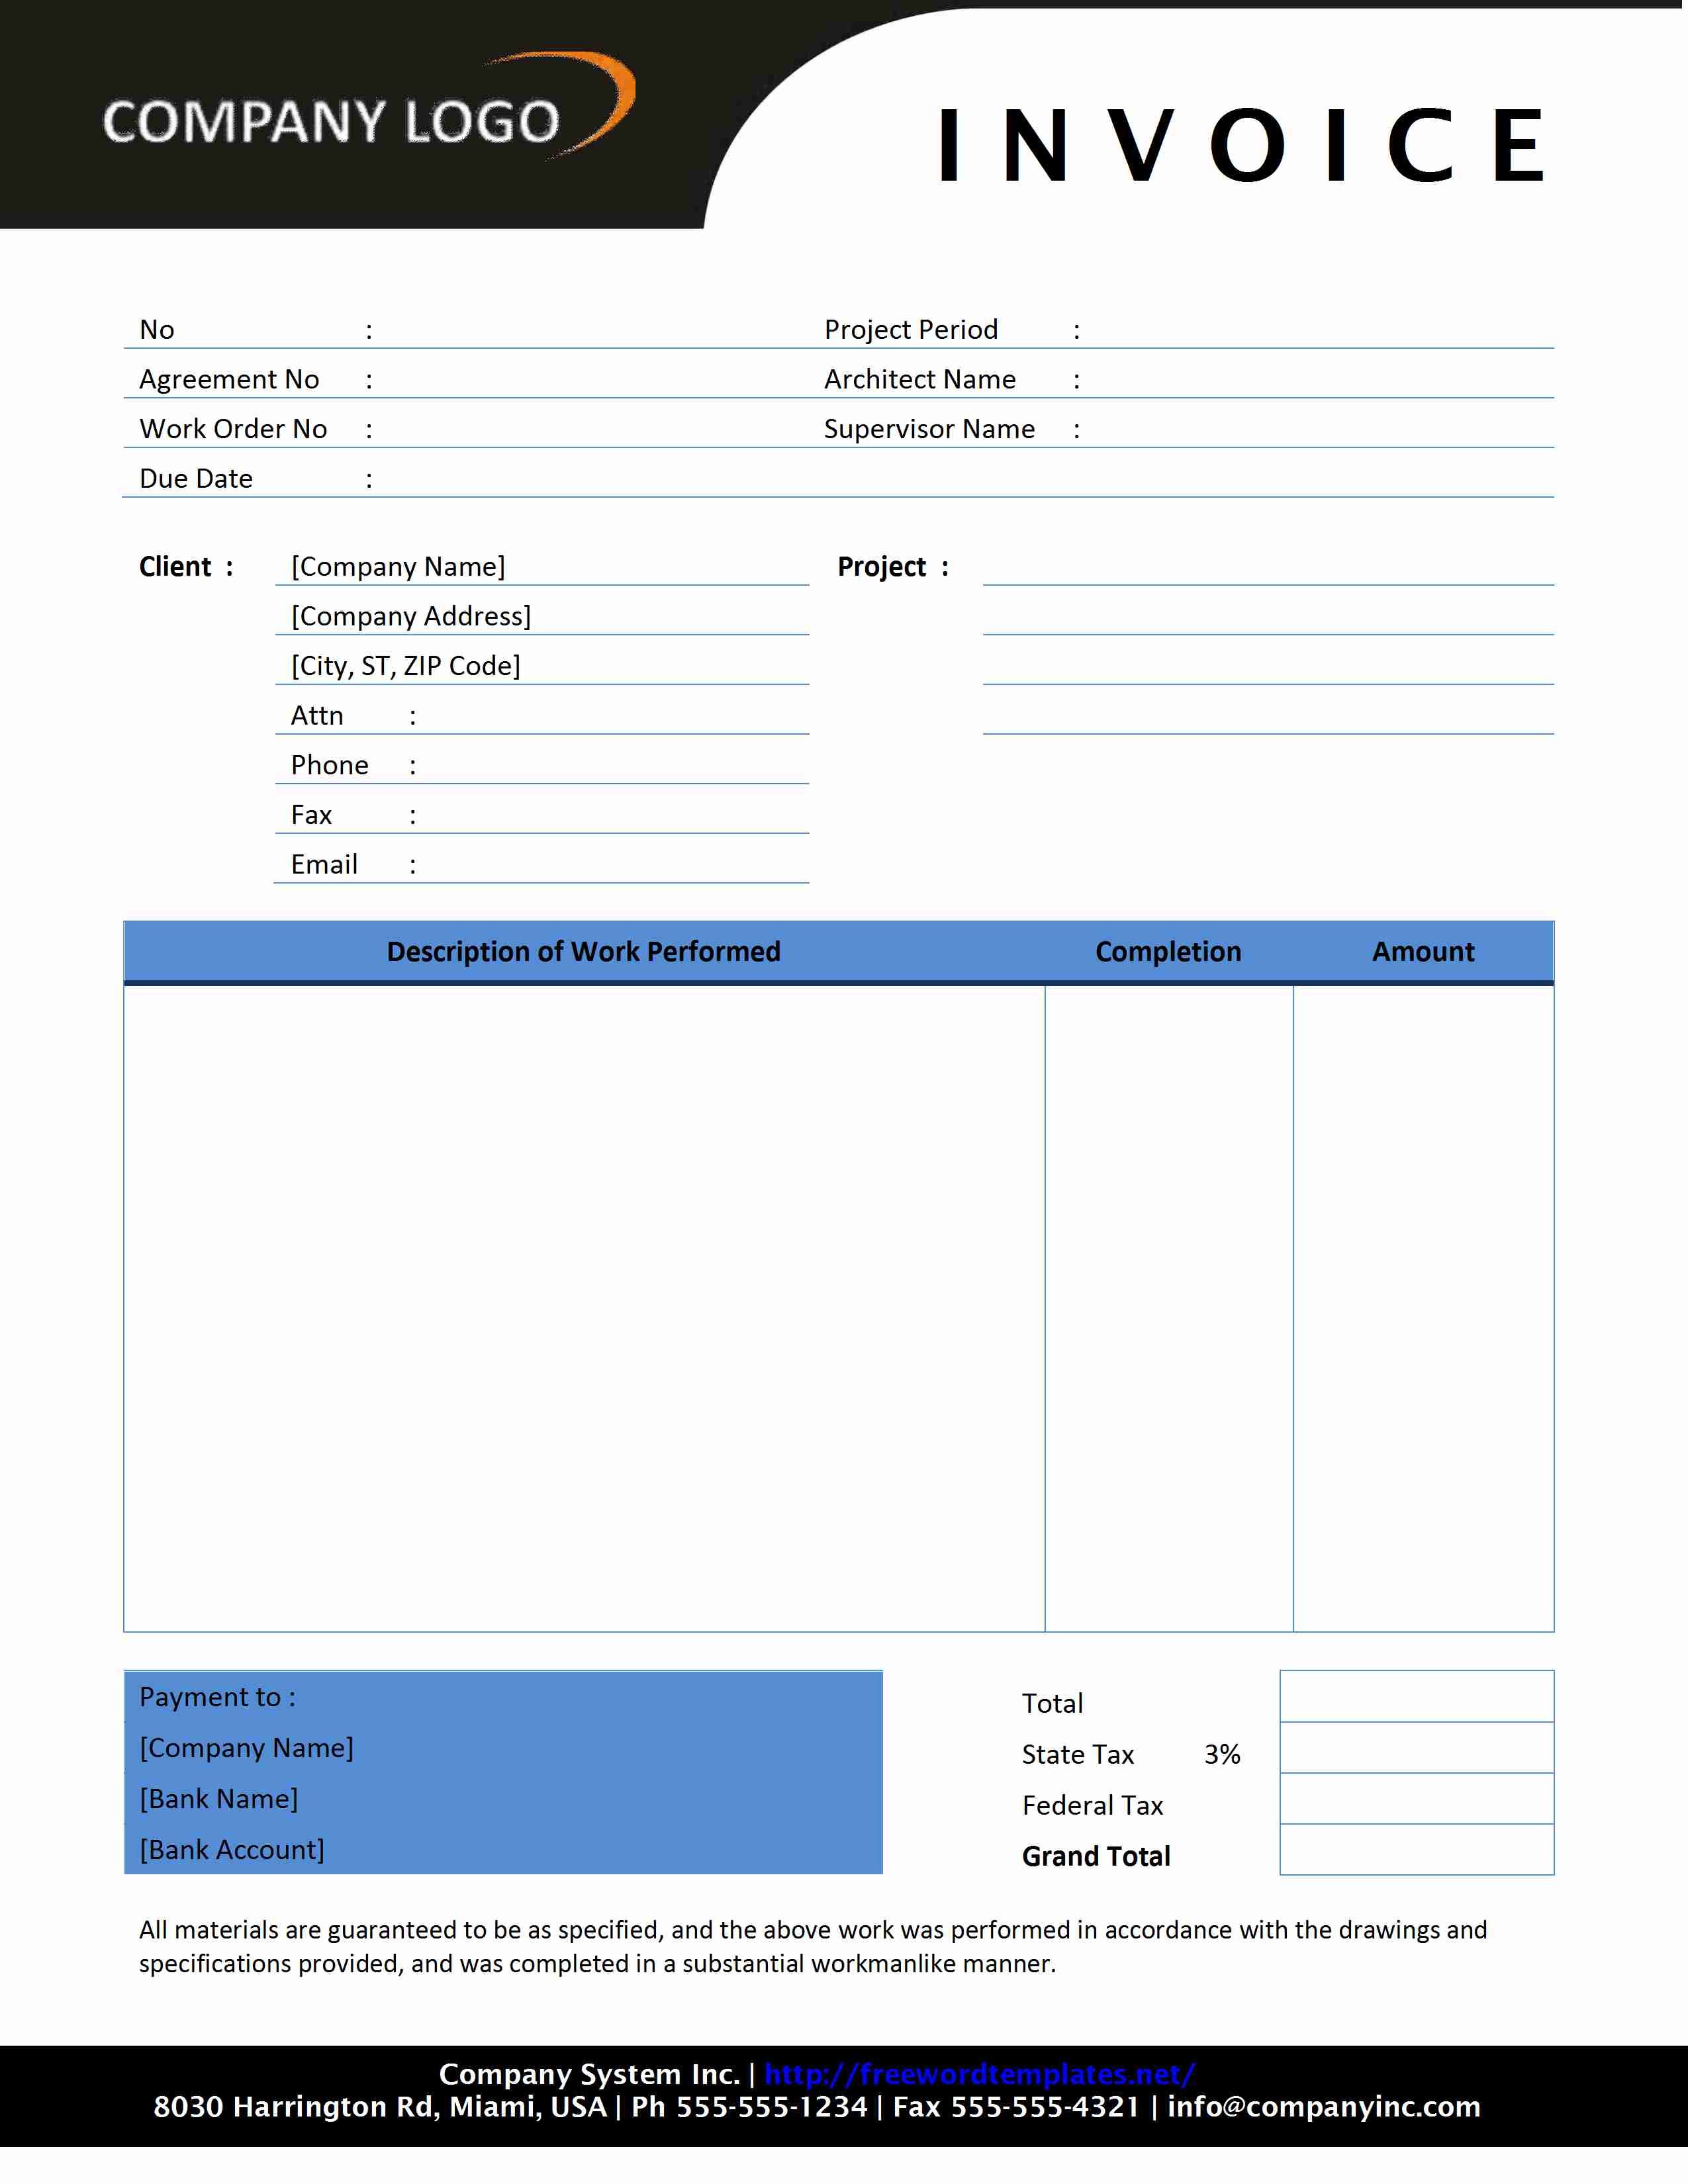 invoice-archives-freewordtemplates